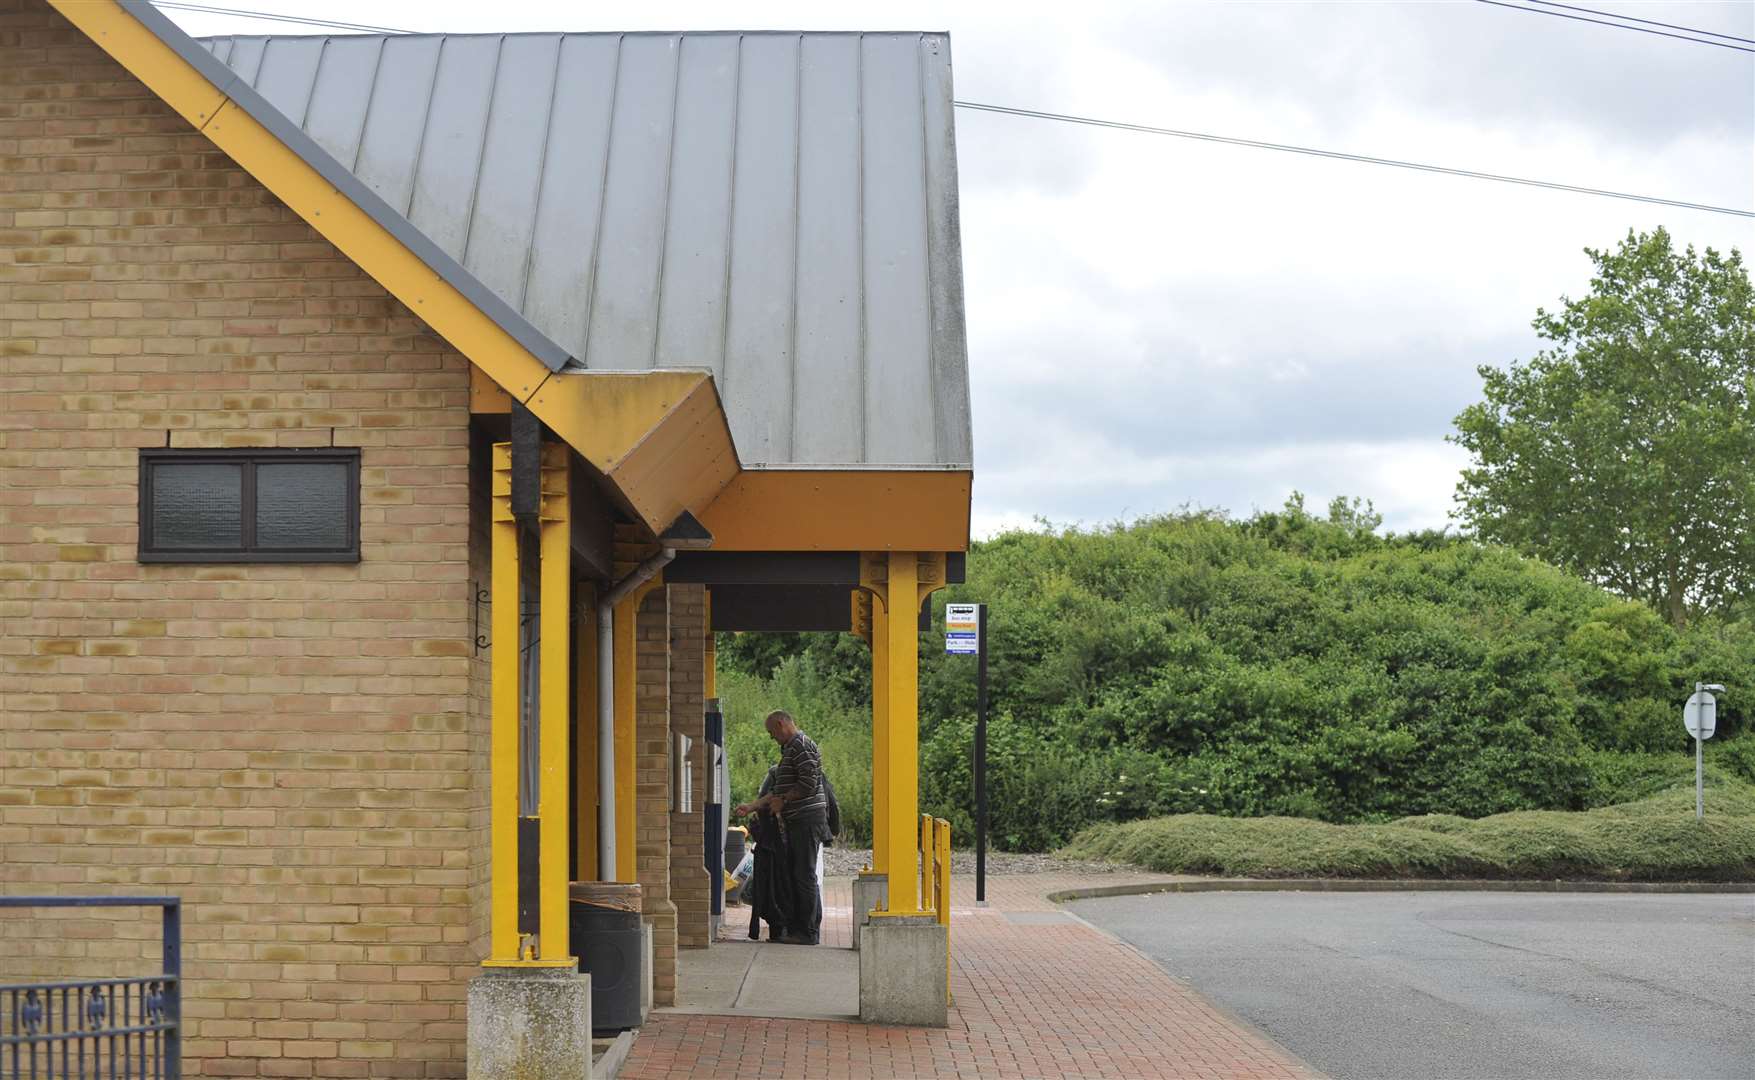 The Sturry Road park and ride building in Canterbury was closed over the weekend